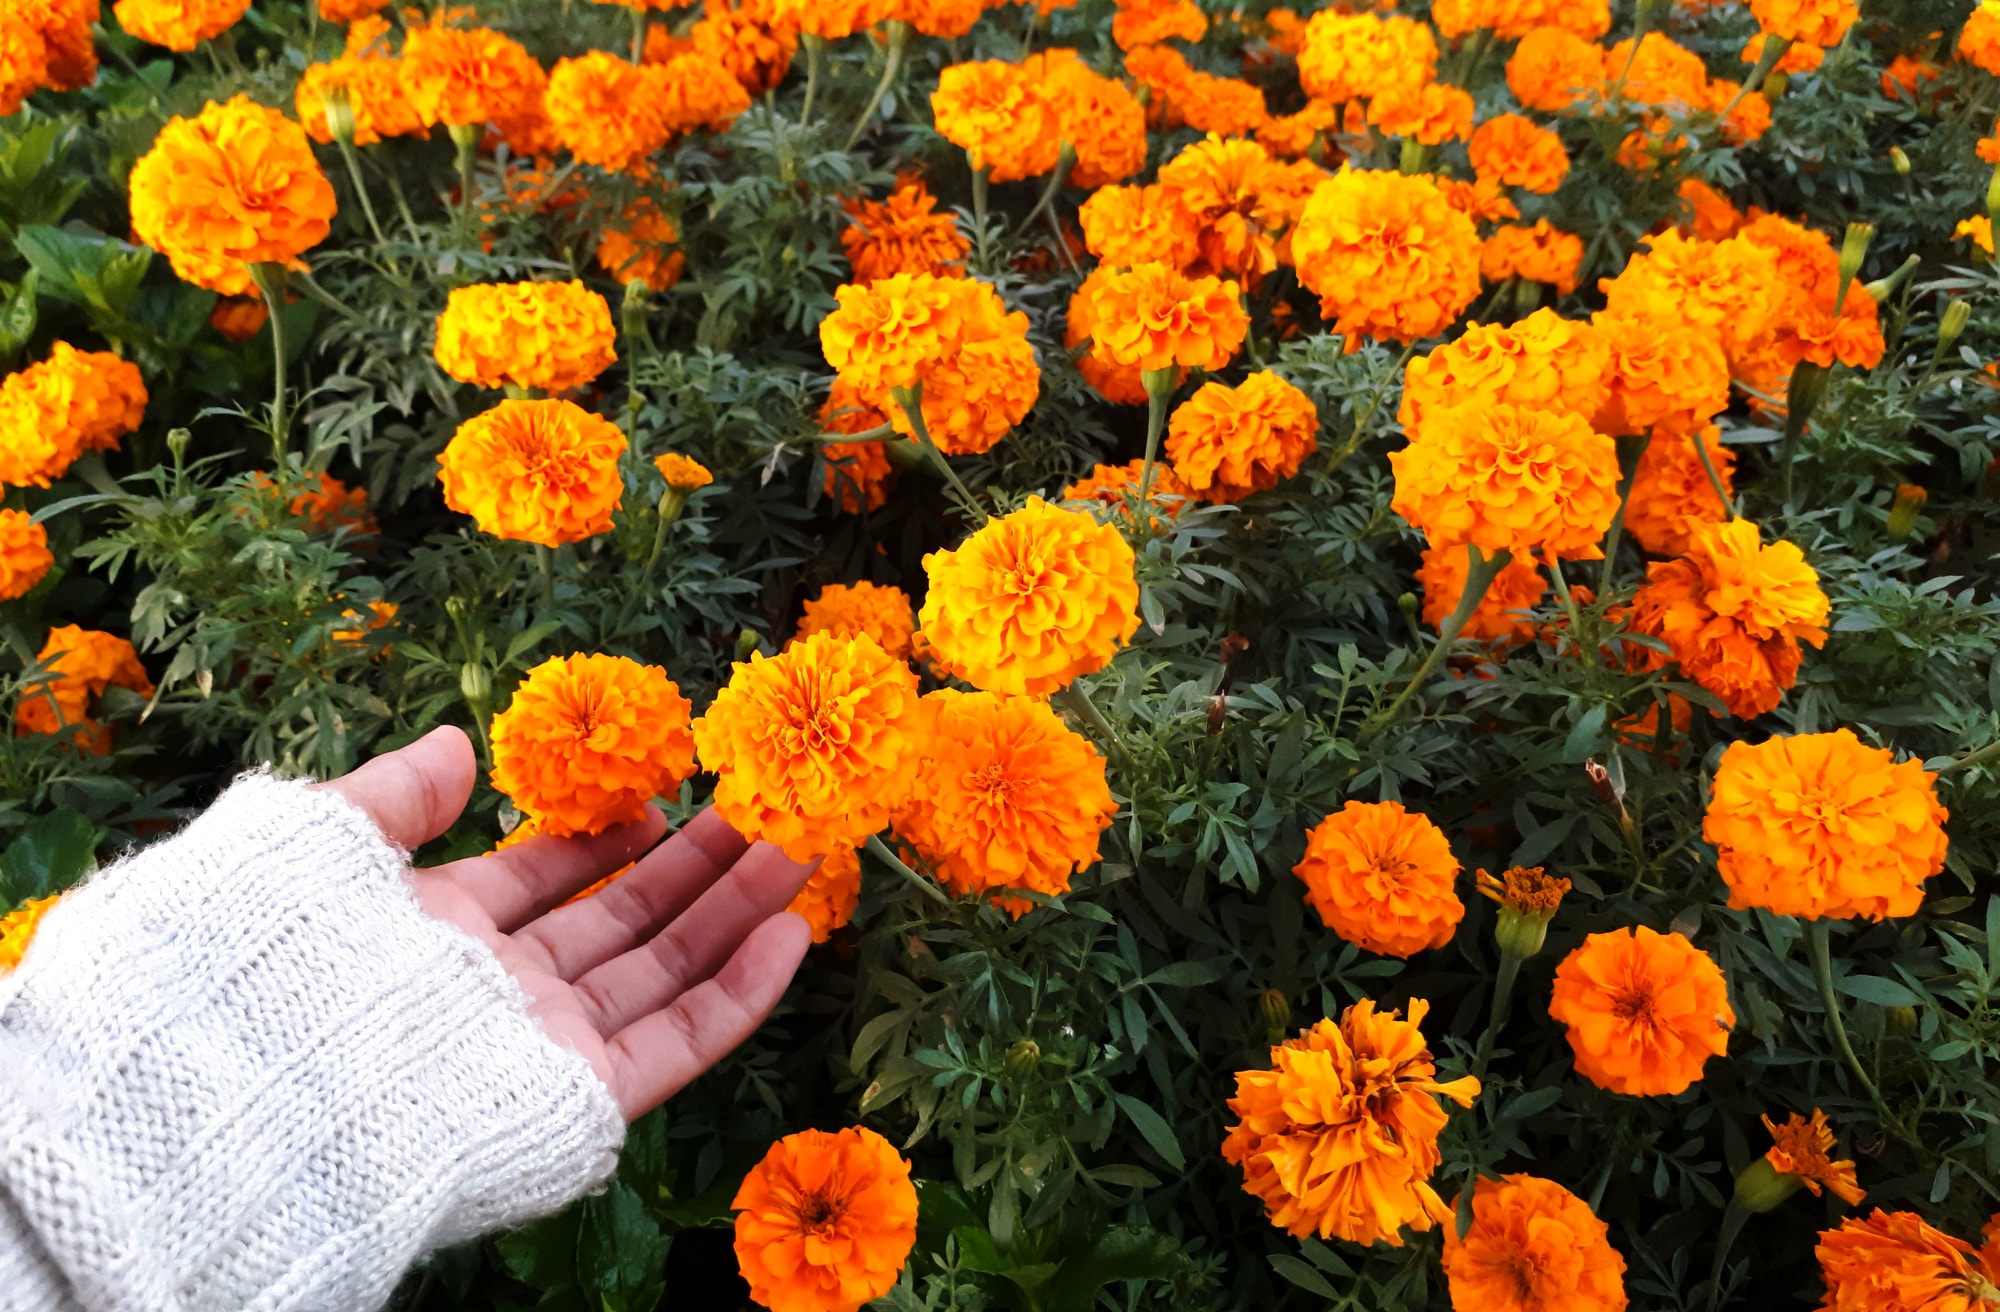 Hand touching a bunch of yellow and orange marigolds